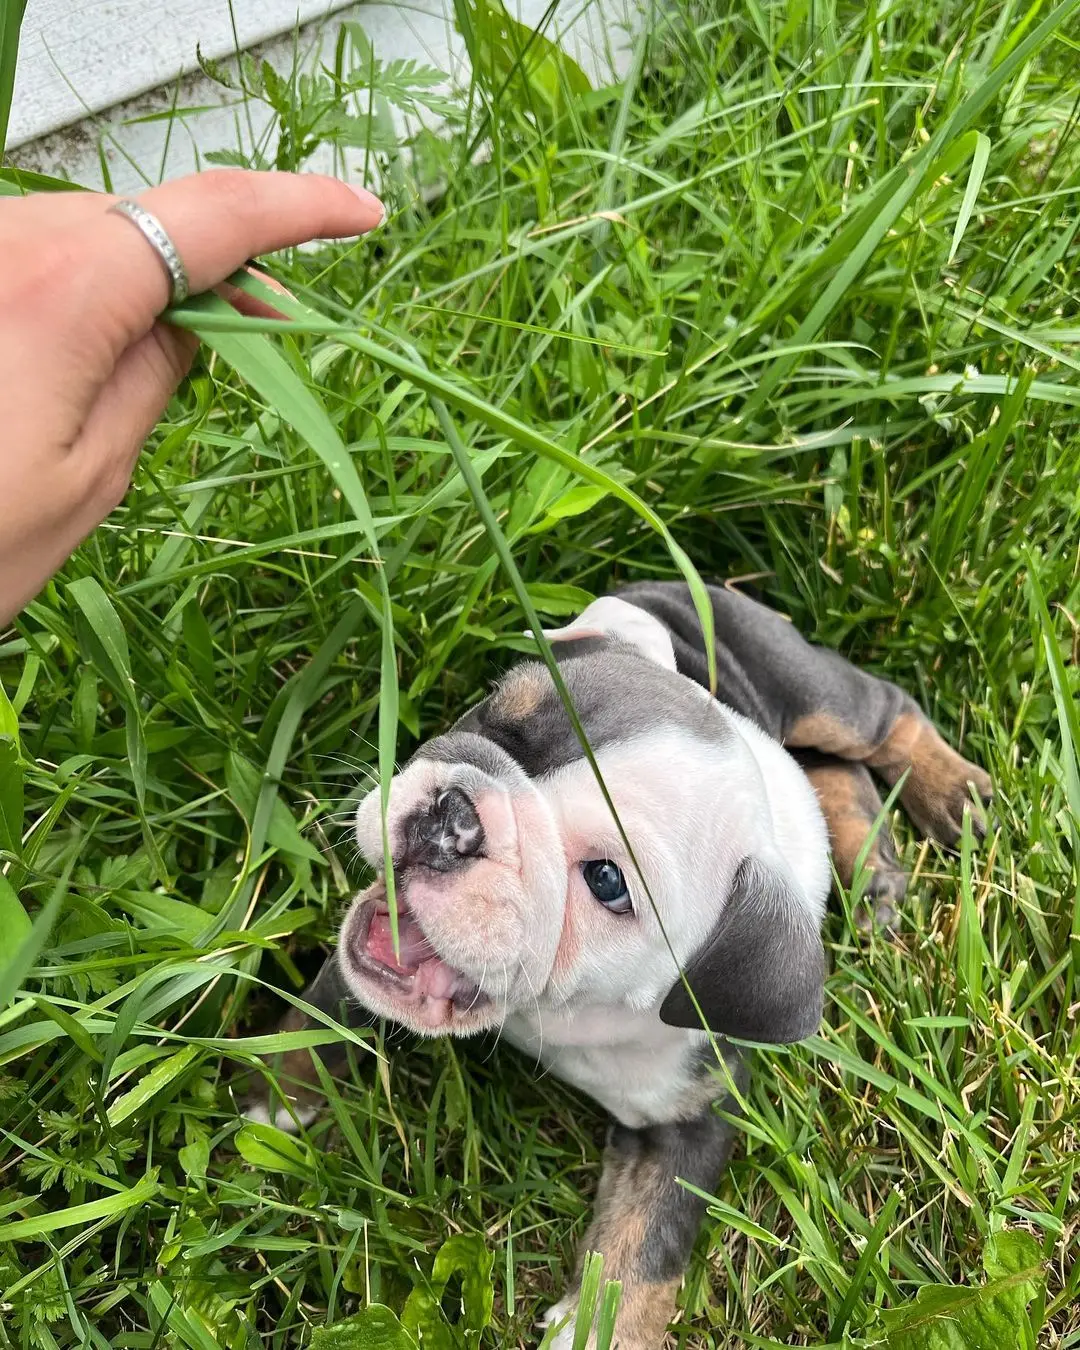 English Bulldogs Puppies For Sale,English Bulldog Puppies For Sale Near Me,English Bulldog For sale,English Bulldog Breeders,English Bulldog Breeders Near Me,English Bulldog Price,Buy English Bulldog,Bulldog For Sale,English Bulldogs for sale,English Bulldog For Sale Near Me,English Bulldog For Adoption